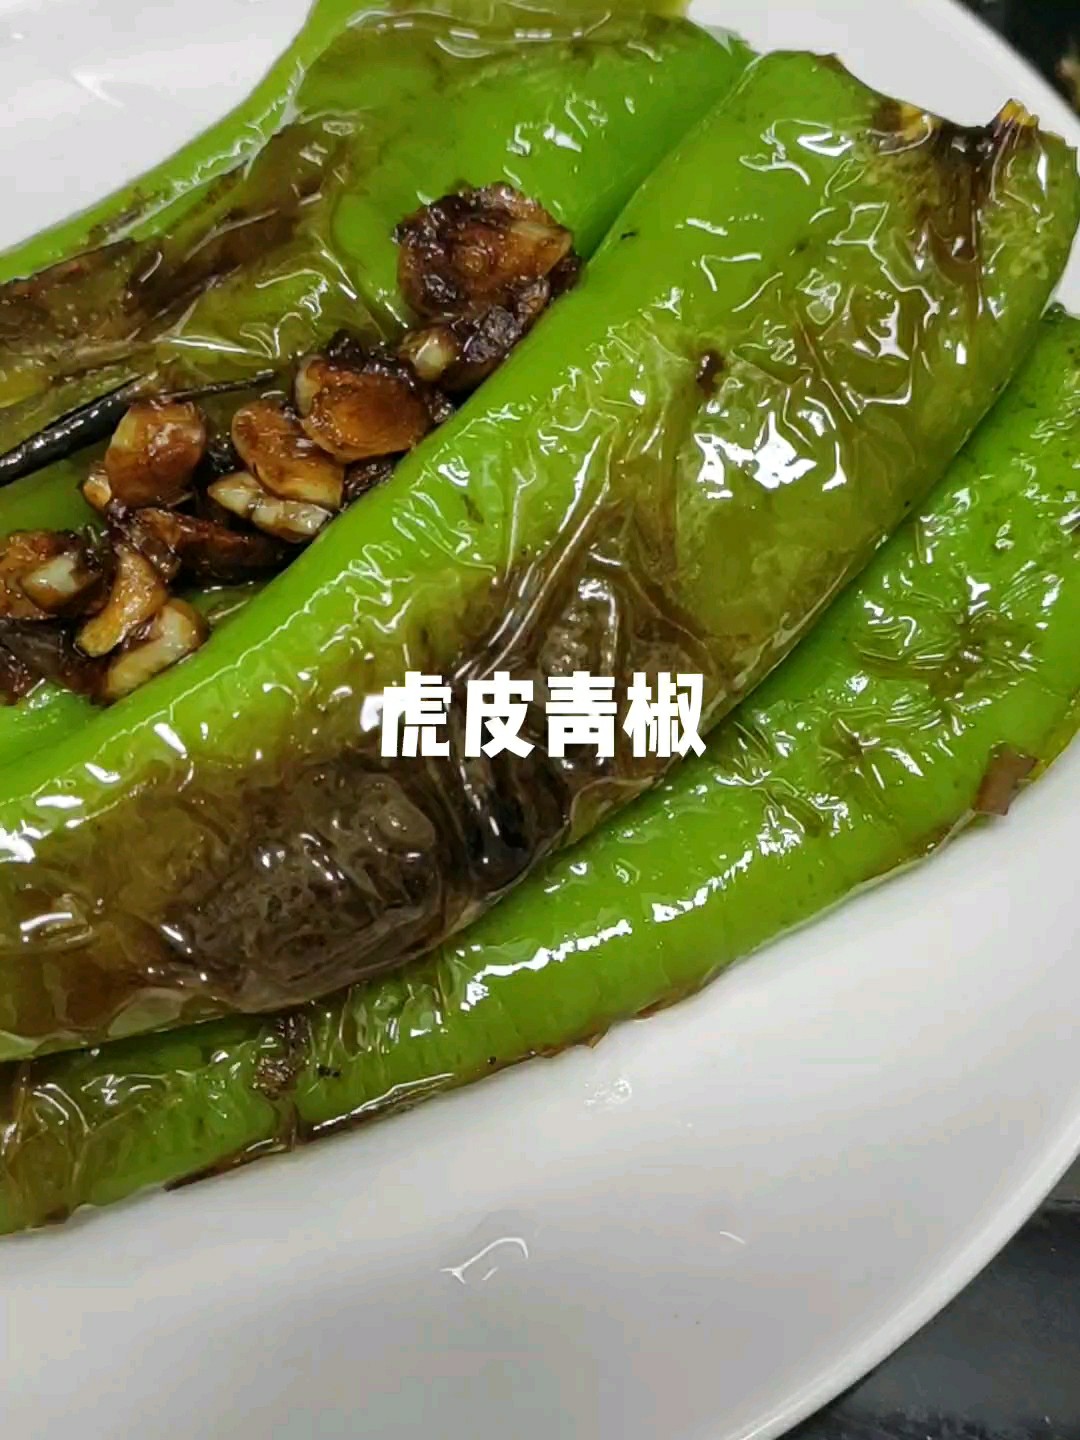 Green Peppers with Tiger Skin